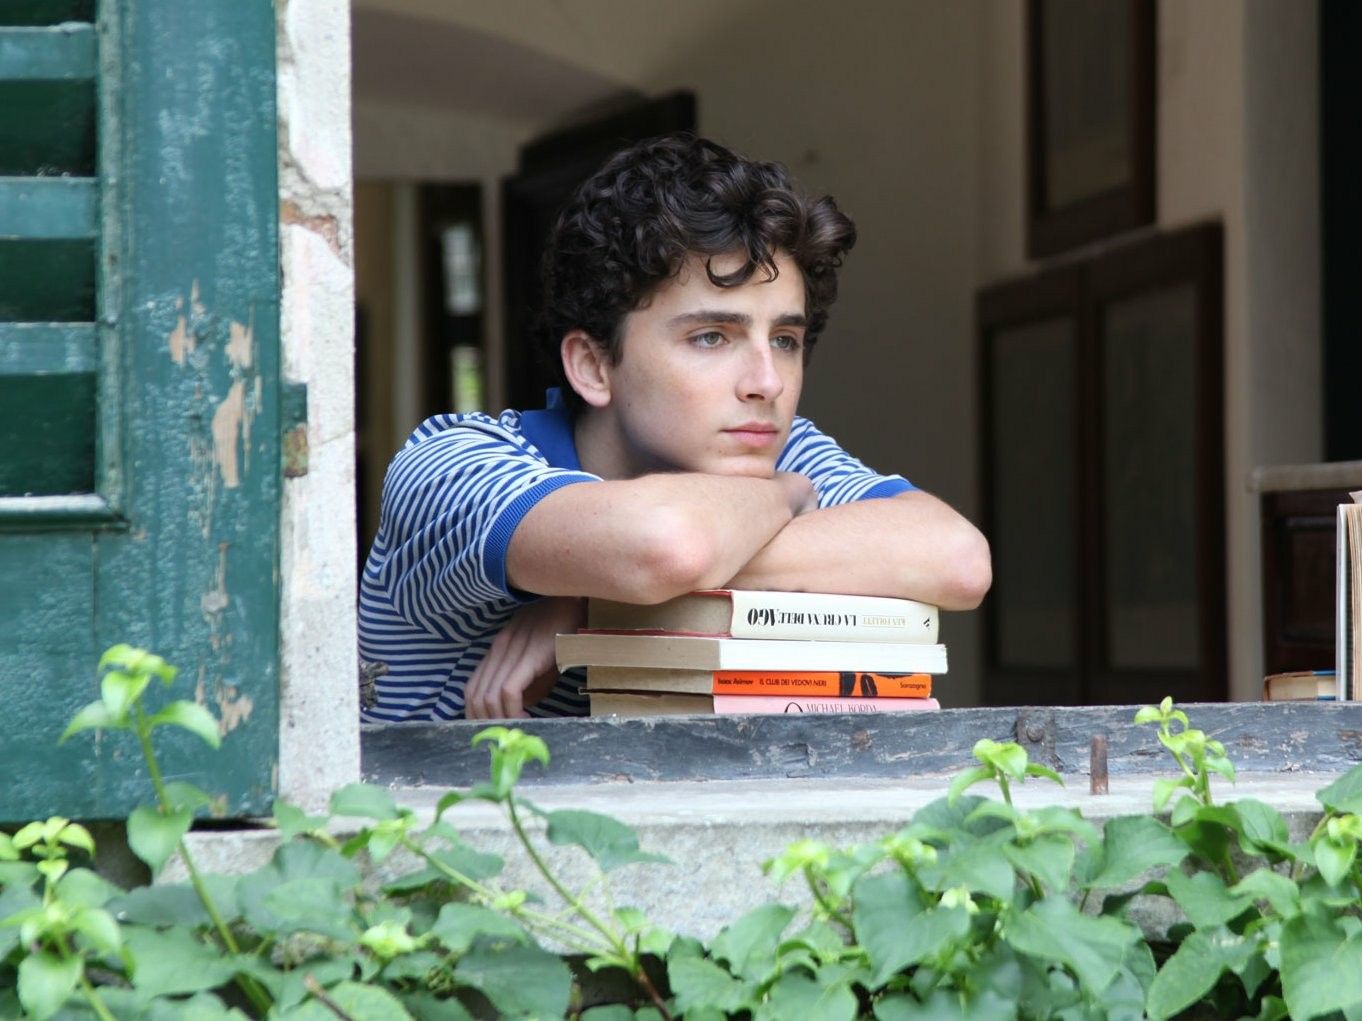 Male Archetype Quiz Call Me by Your Name Timothée Chalamet thinking